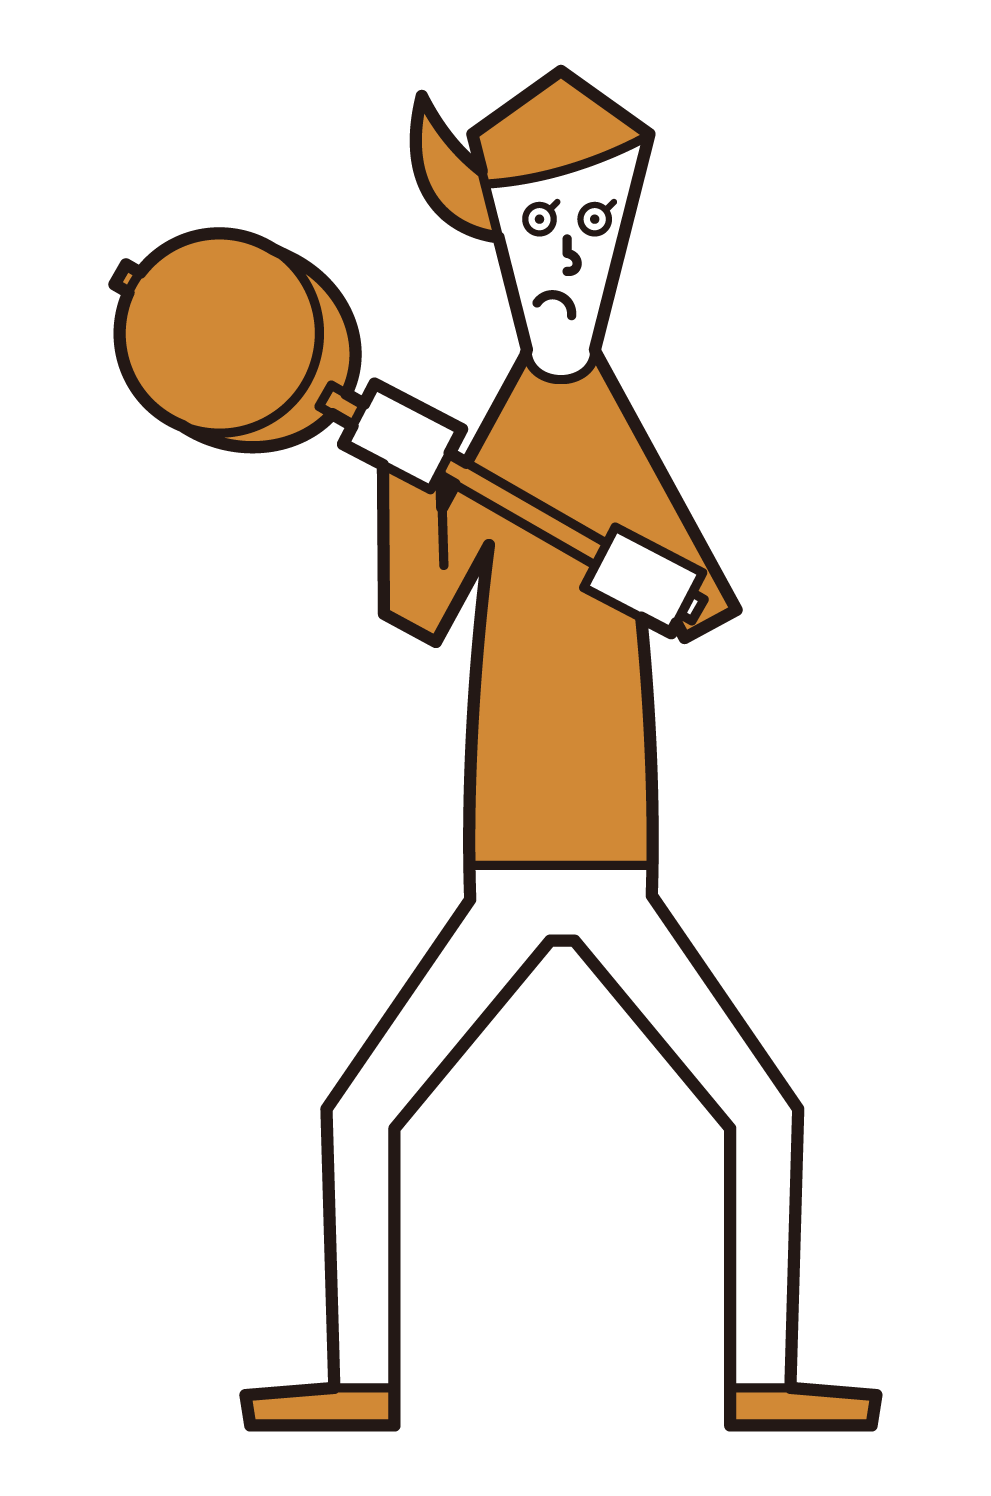 Illustration of a woman using a hammer